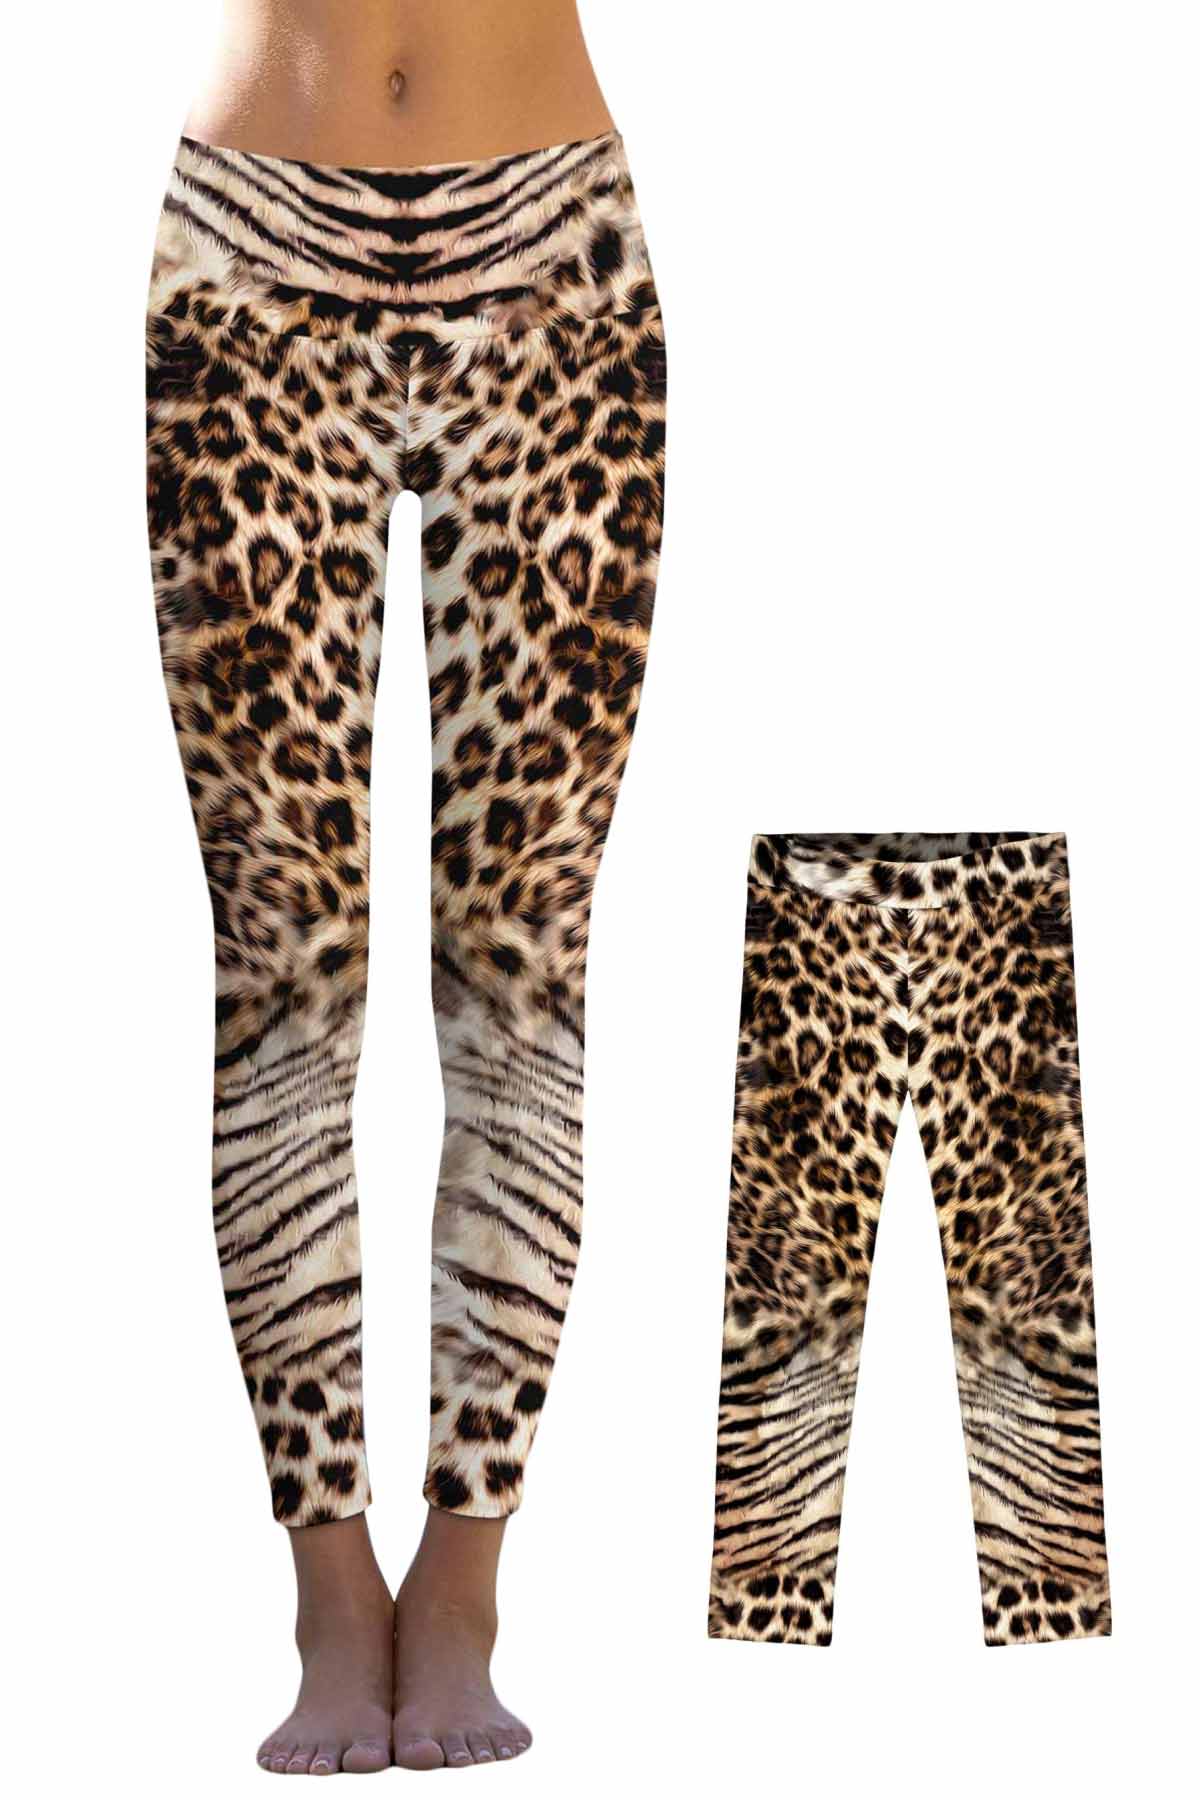 Wild Instinct Lucy Brown Animal Leopard Print Leggings - Mommy and Me - Pineapple Clothing